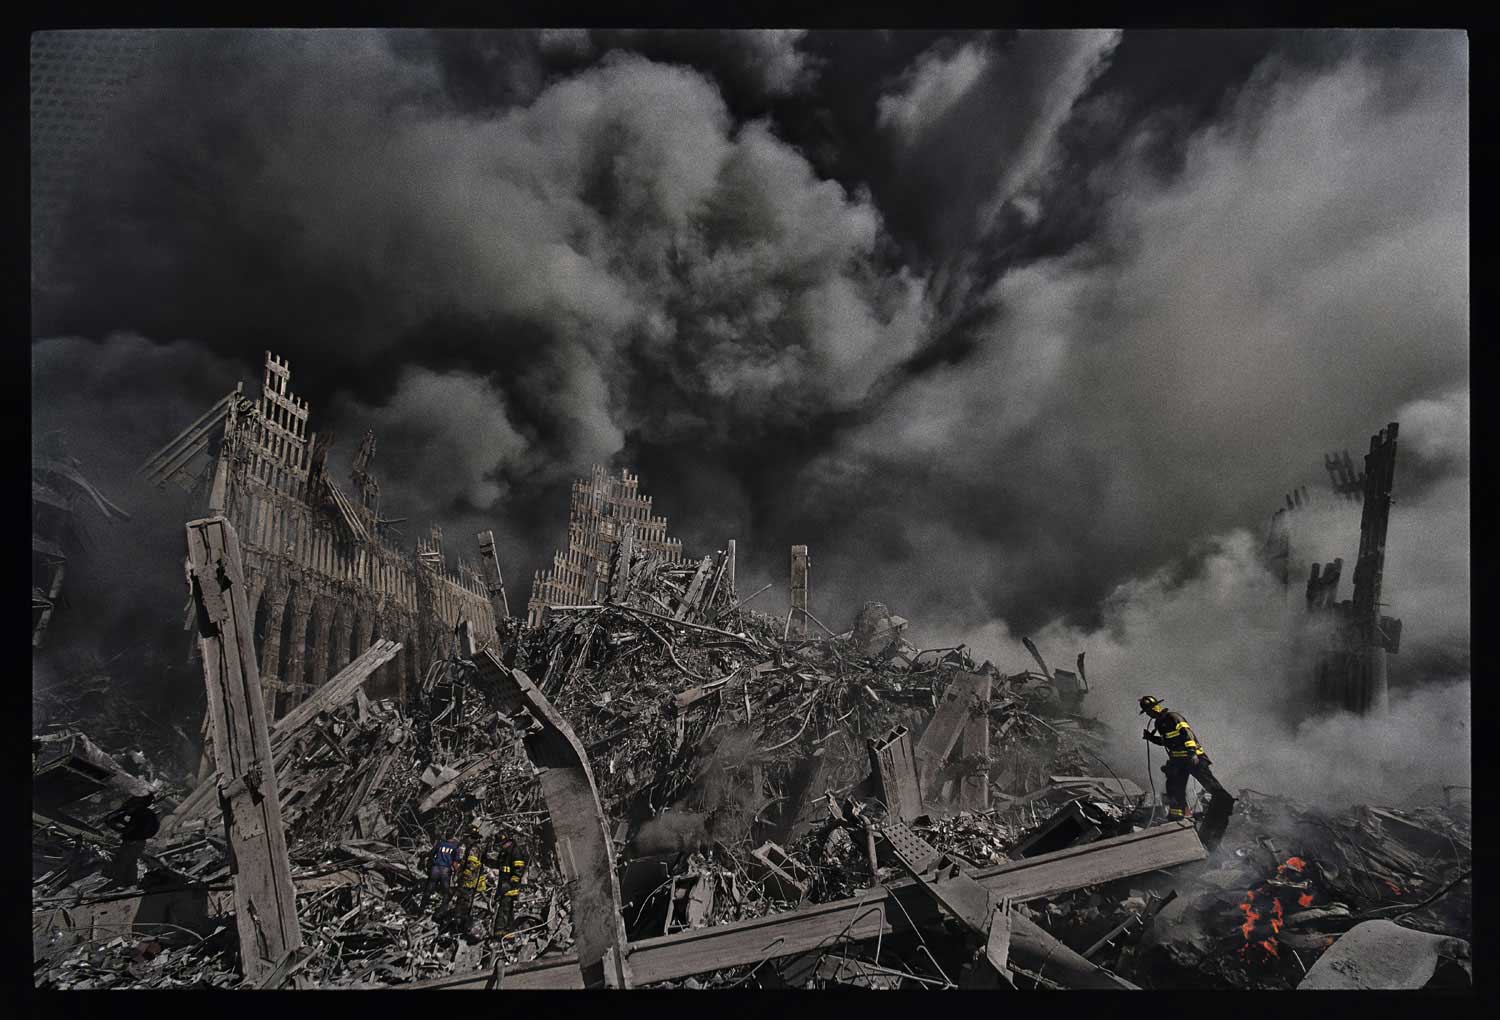 MaryAnne Golon, photo editor and media consultant; former Director of Photography of TIME "James NachtweyÕs photograph here of one tiny New York City fireman making his way through the inferno that was once the World Trade Center towers is forever seared into my memory from the darkest day in American history, 9/11/2001. Later on that evening, Jim, completely covered in ash from the fallen World Trade Center towers, arrived in person at the Time and Life building in midtown Manhattan to deliver his exposed film to his waiting editors. While his film was being processed, he drank a large bottle of water, and slumped exhausted in a dark green chair in the Time photo department hallway. The following morning, the imprint of his body on the chair and his dusty footprints were still there. Then editor-in-chief Norman Pearlstine and his deputy, John Huey, came by to see where the great photographer had walked. James Kelly, the finest news magazine editor in America, chose to run many of JimÕs pictures in the 9/11 black-bordered issue of TIME Magazine that memorialized that tragic event. I was honored to have been the picture editor of that edition and to be the first person in the world to have seen JimÕs haunting work. It took months for me to grieve as a human being. I was working 80-hour weeks to do my job as a journalist. JimÕs work comforted me and helped many Americans to process the hideous aftermath of those horrendous days. Thank you, Jim Nachtwey."